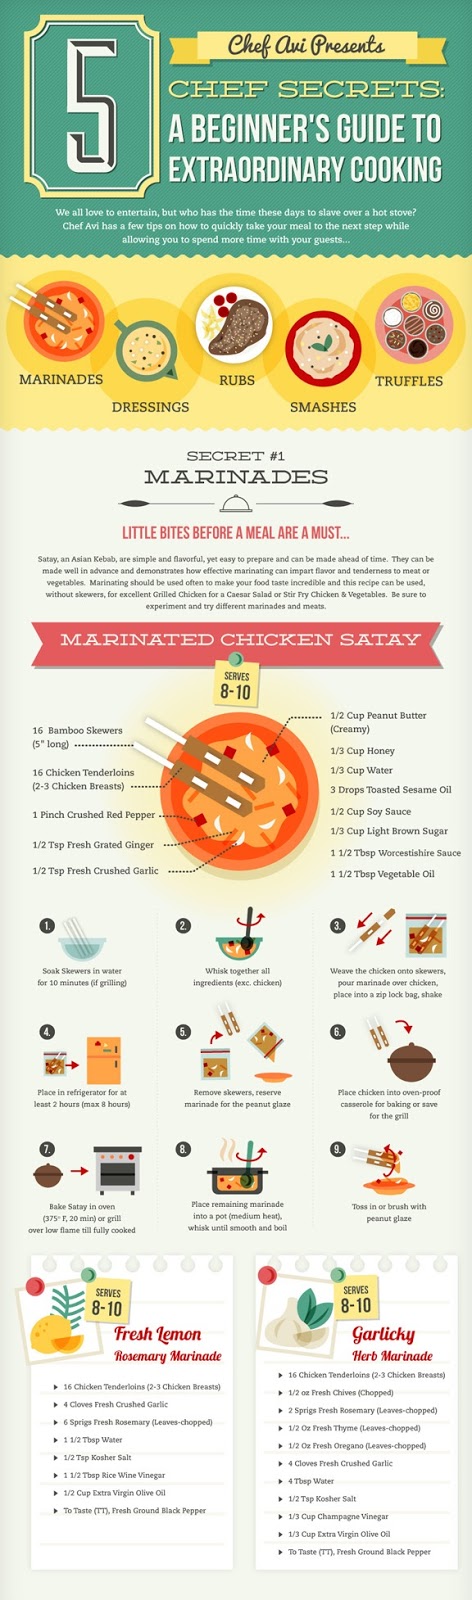 A Beginner's Guide to Extraordinary Cooking - Infographic